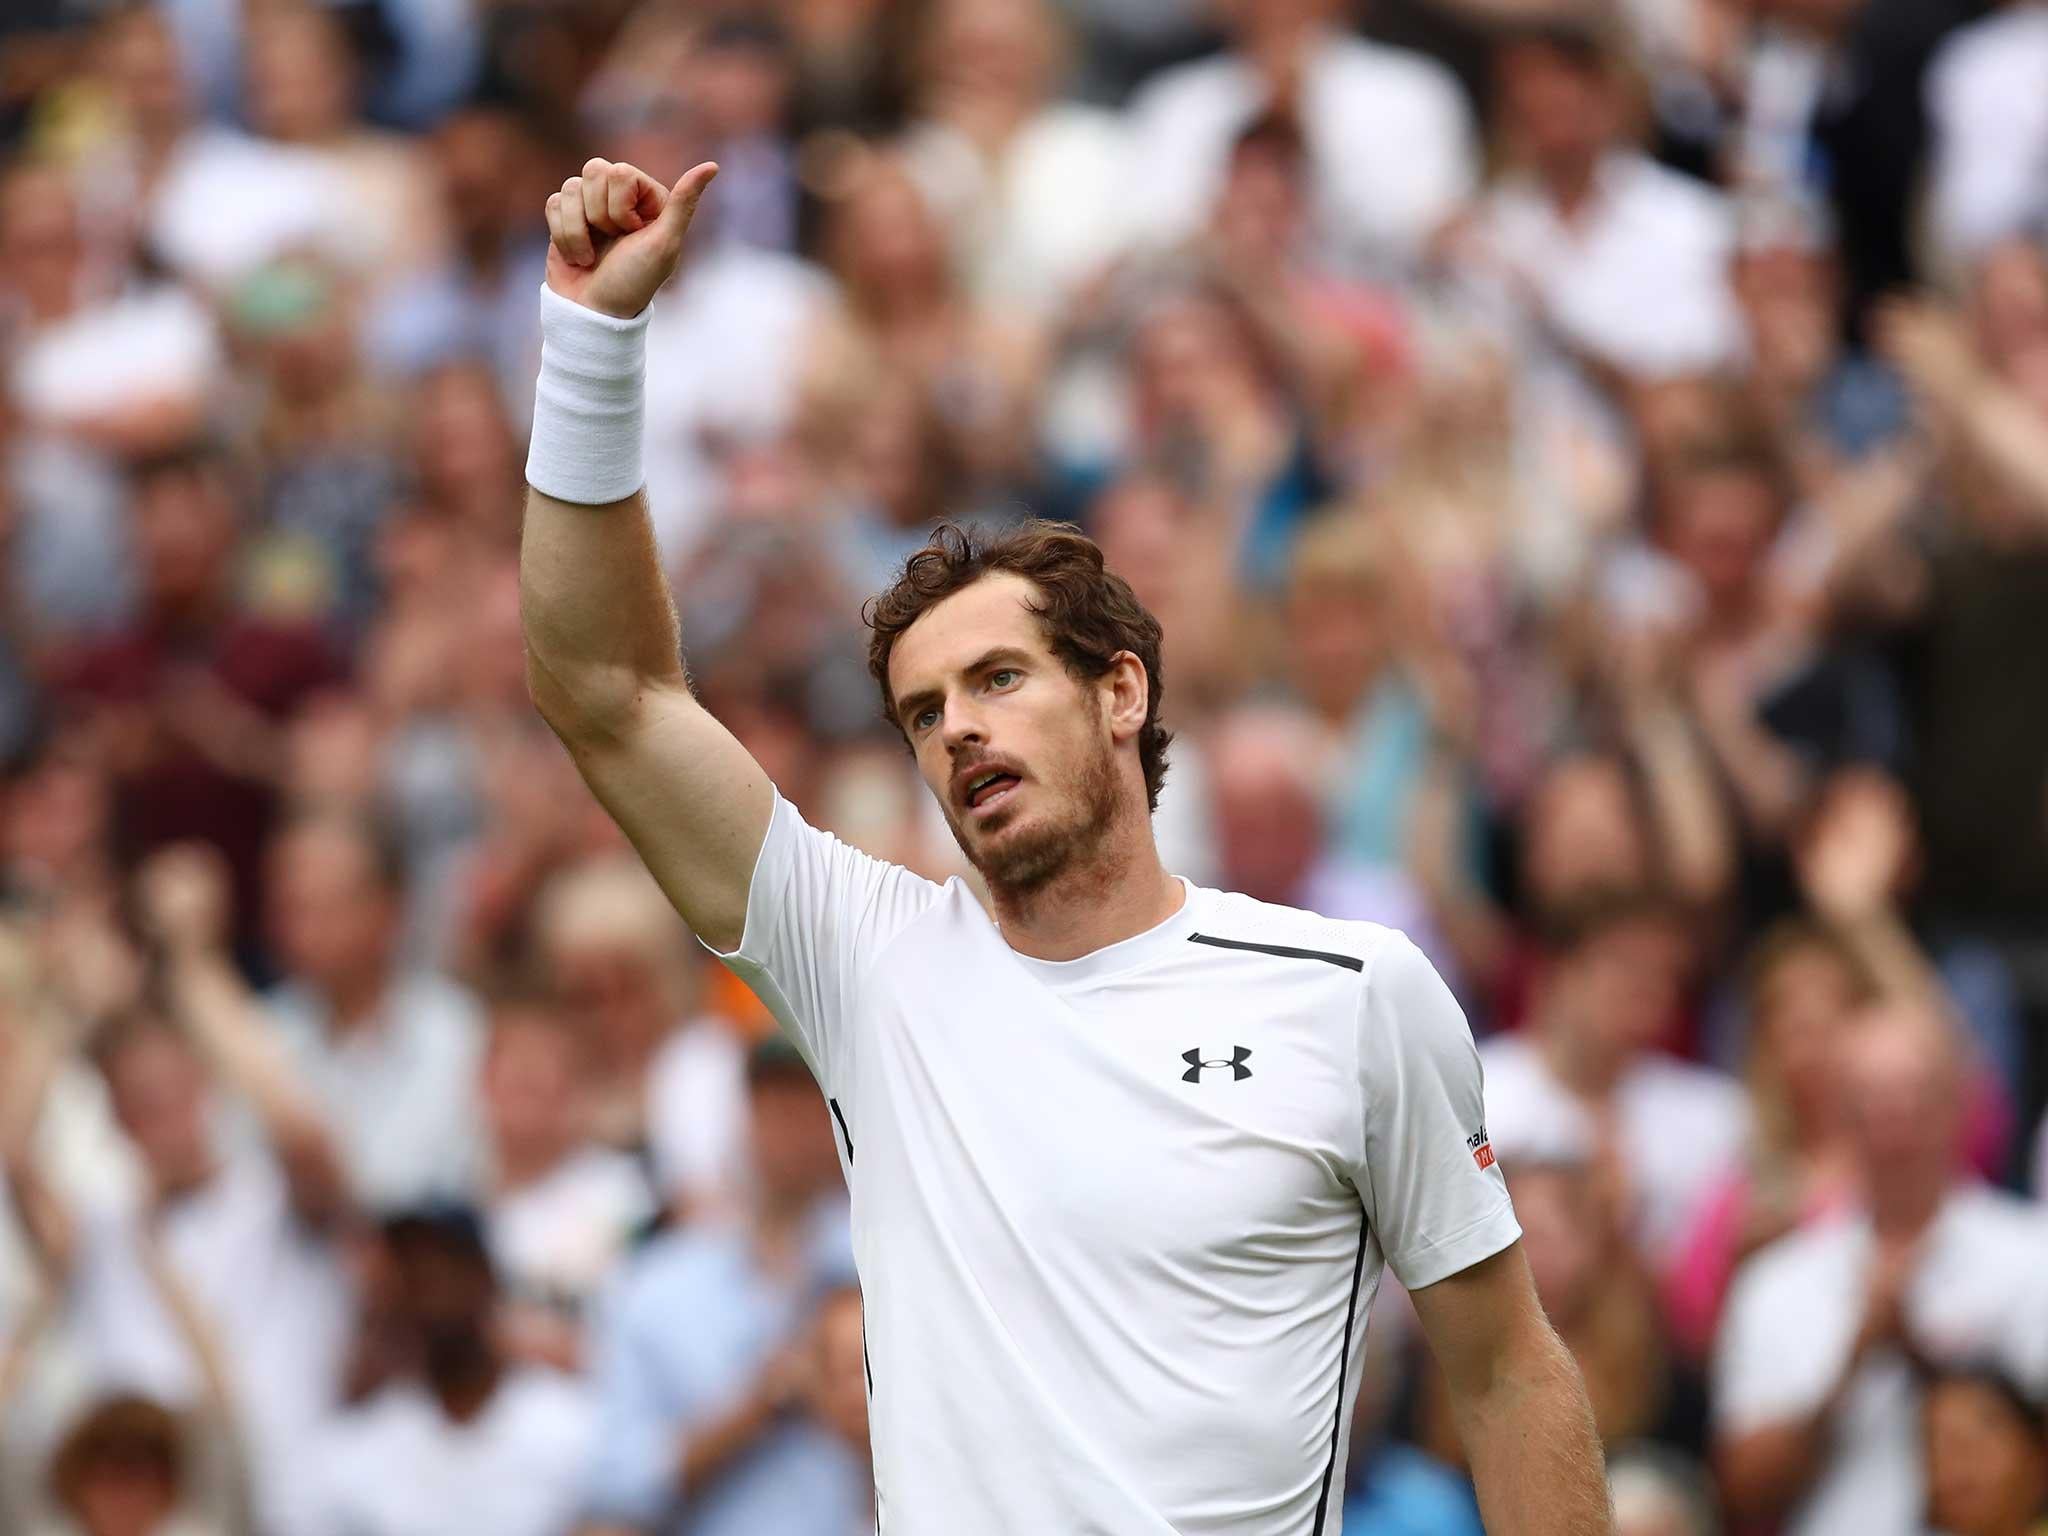 Andy Murray celebrates on Centre Court after getting off to a winning start at this year's Wimbledon